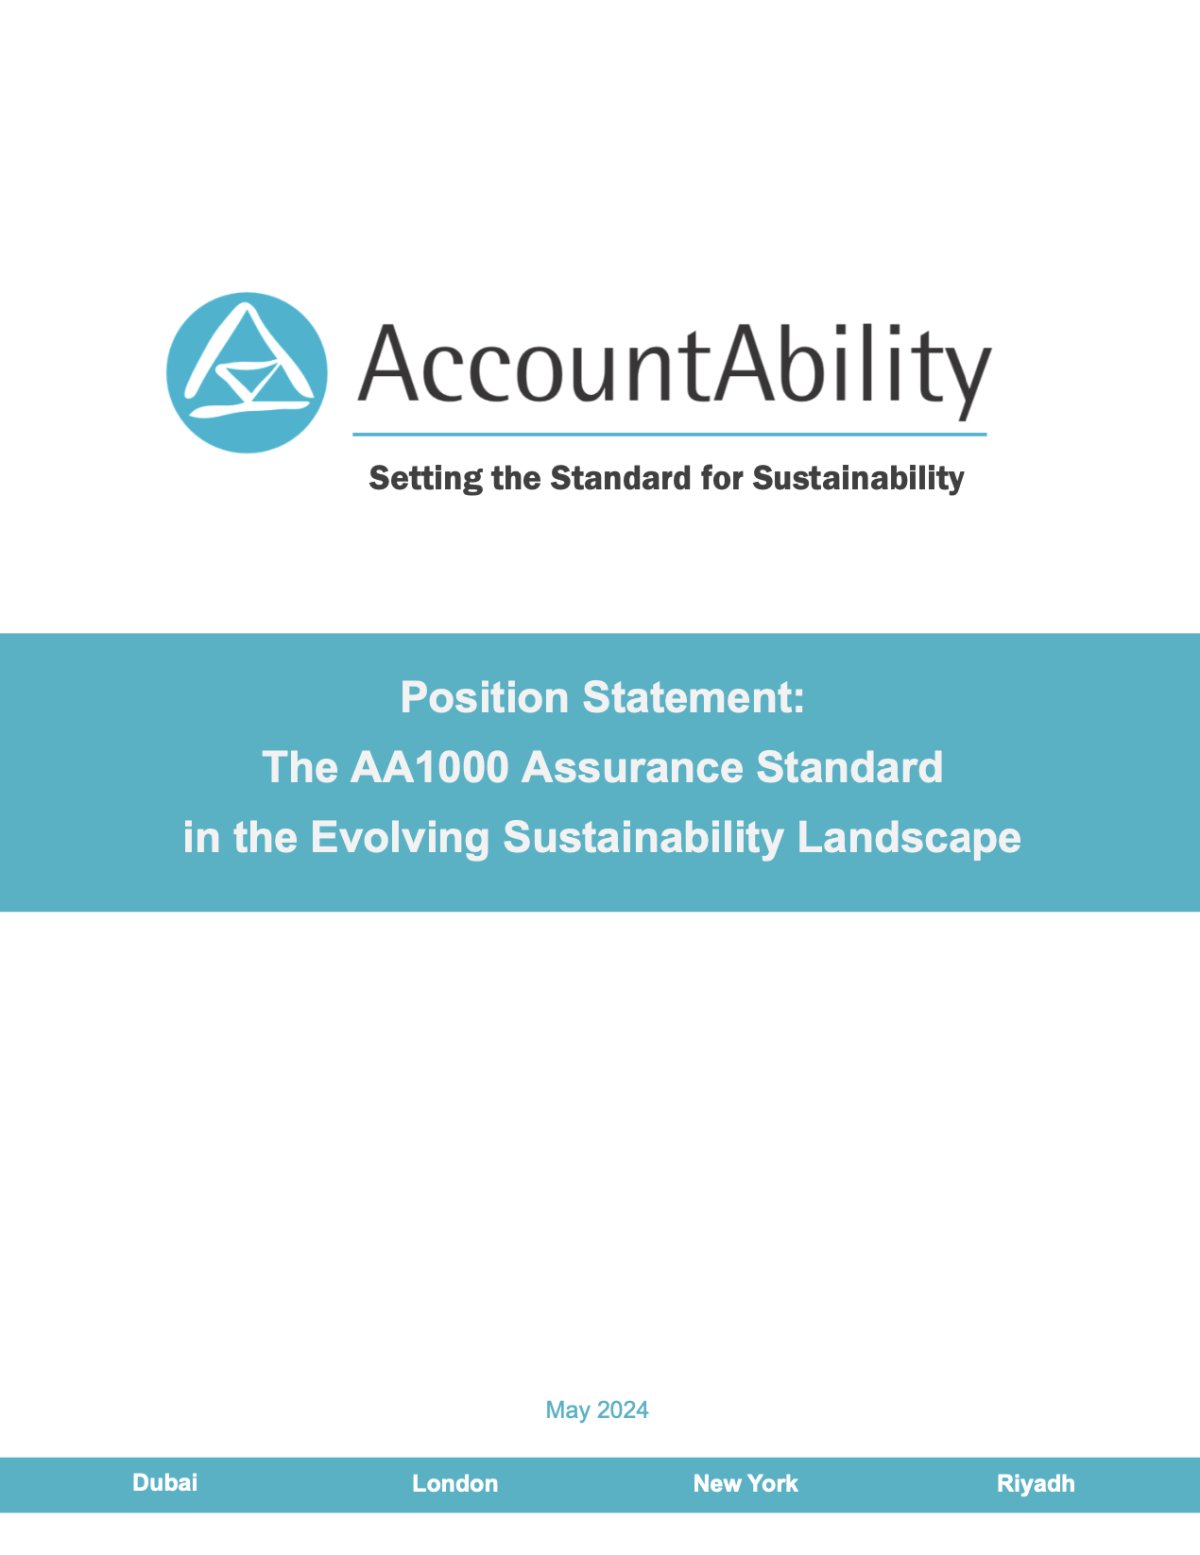 AccountAbility Position Statement